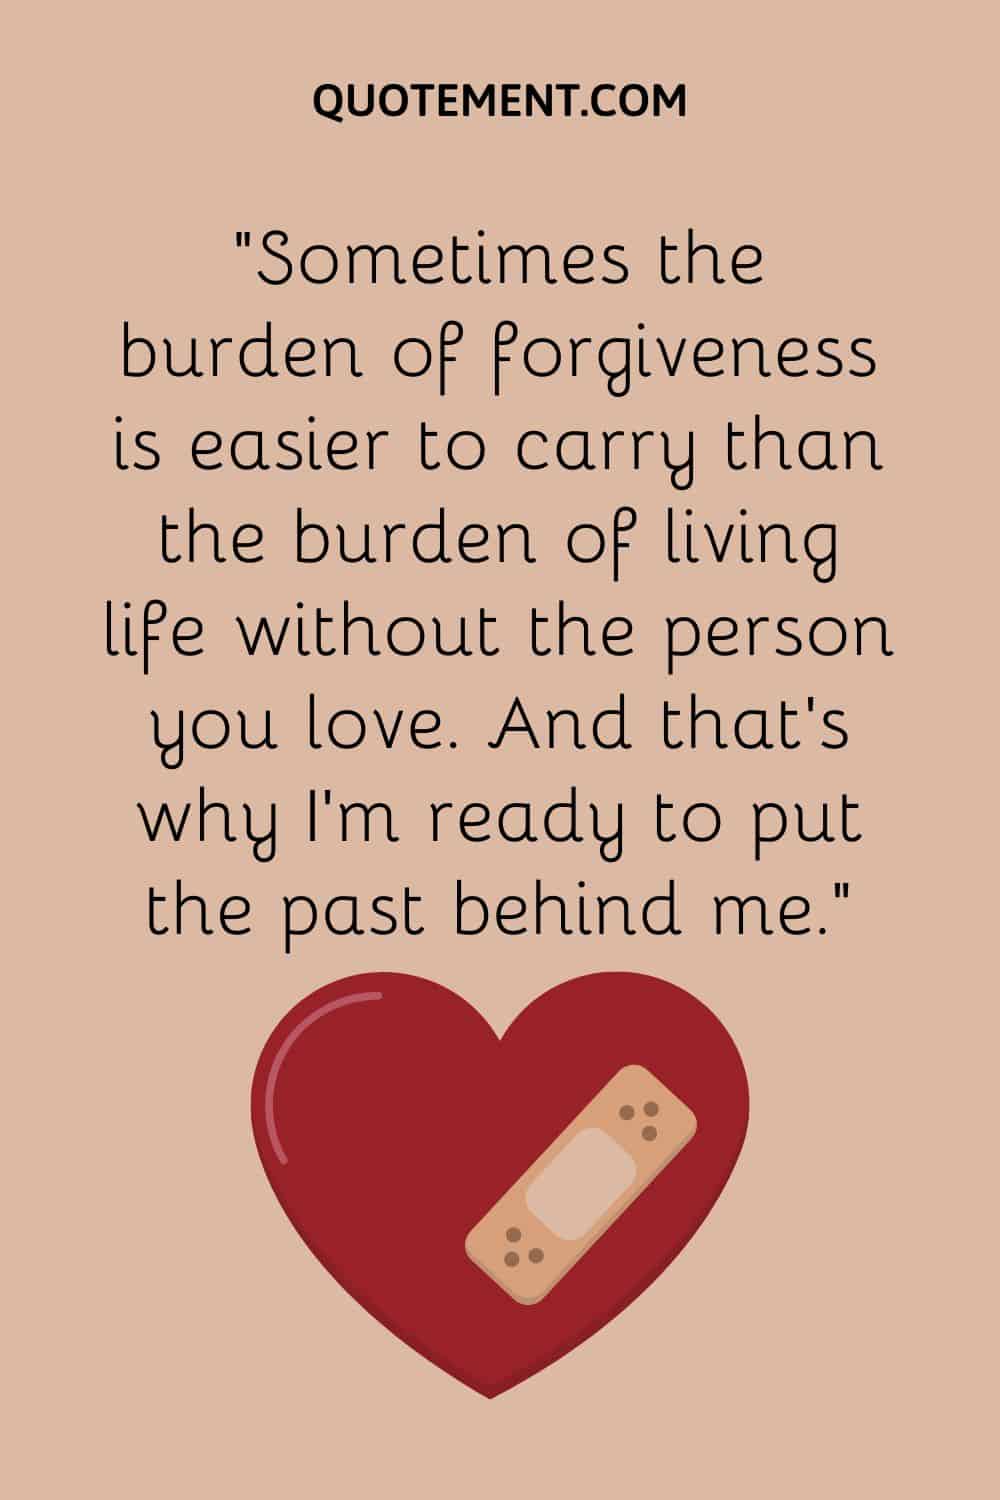 Sometimes the burden of forgiveness is easier to carry than the burden of living life